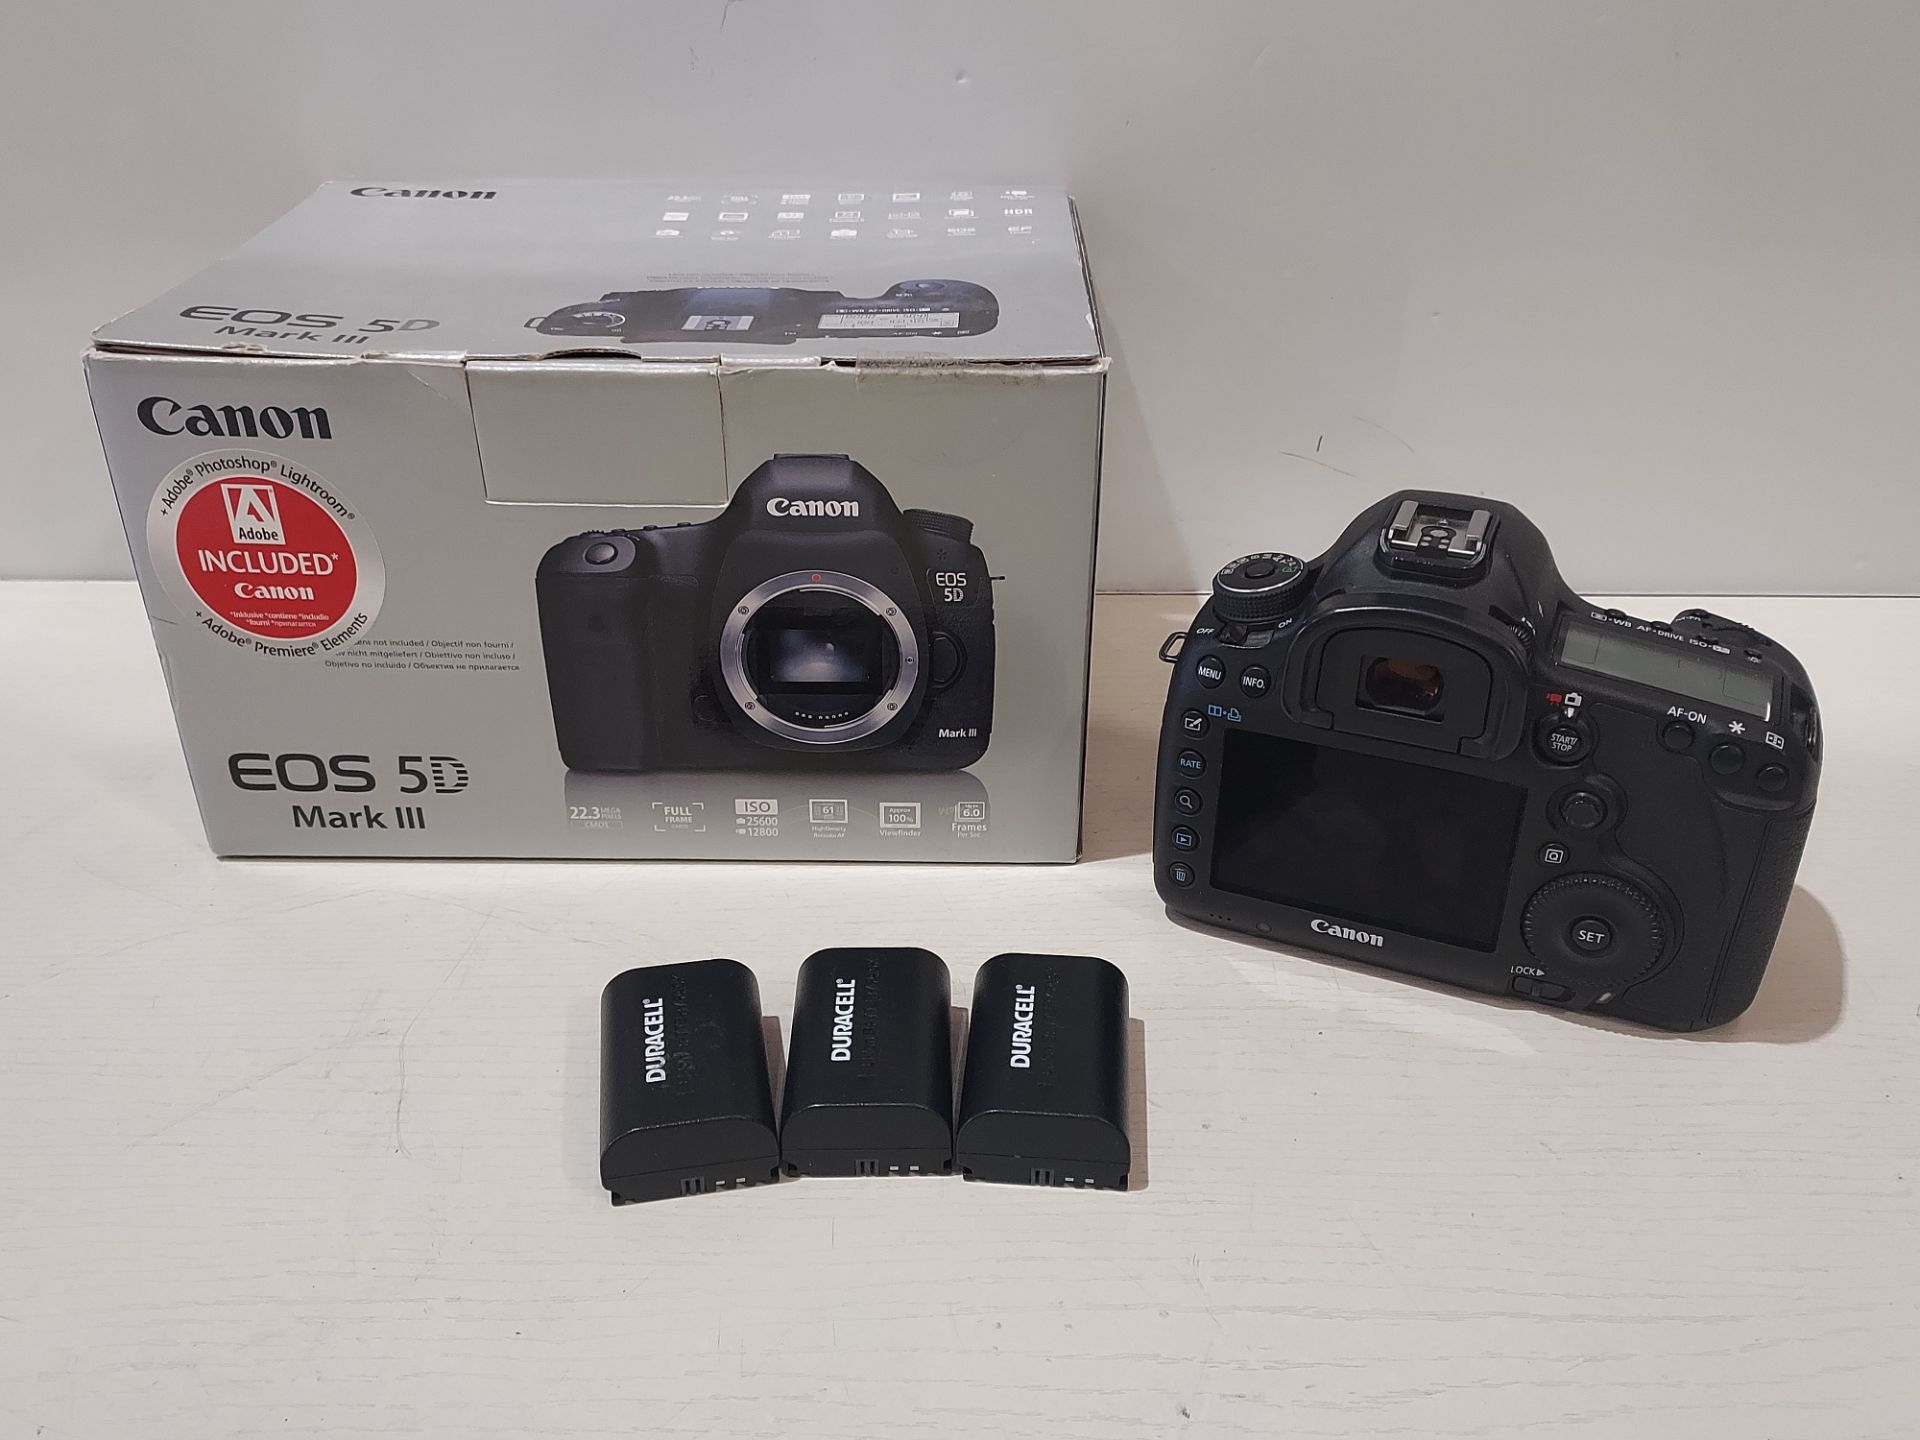 CANON 5D MARK III EOS DIGITAL CAMERA BODY WITH SPARE BATTERIES WITH ORIGINAL BOX - Image 3 of 3